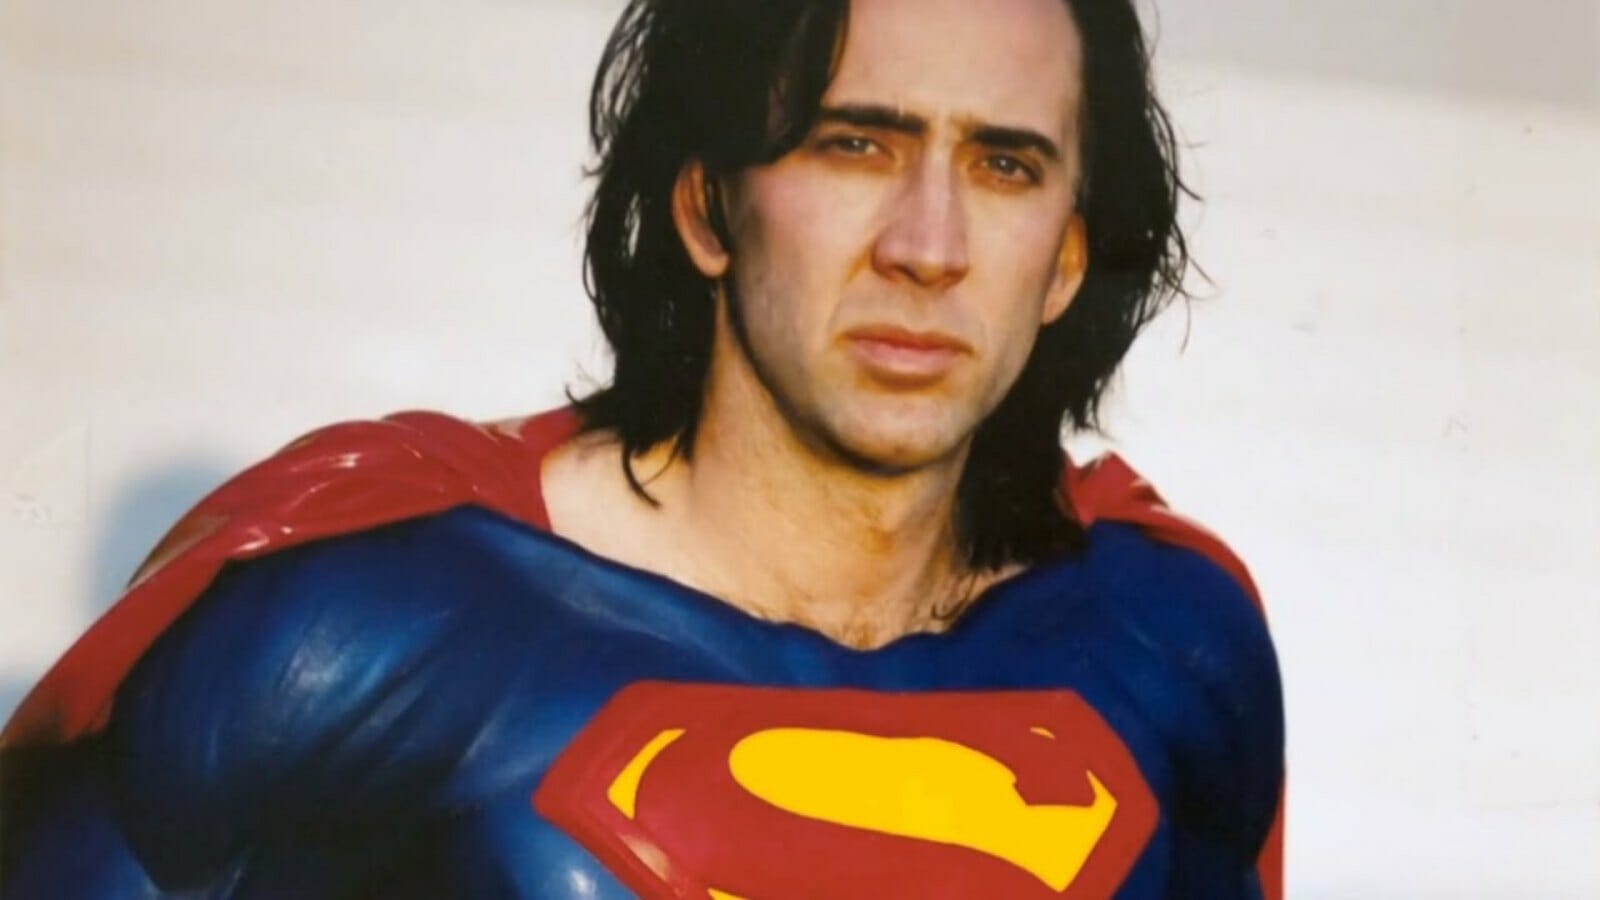 Leaked image of Cage in Superman suit from Superman Lives